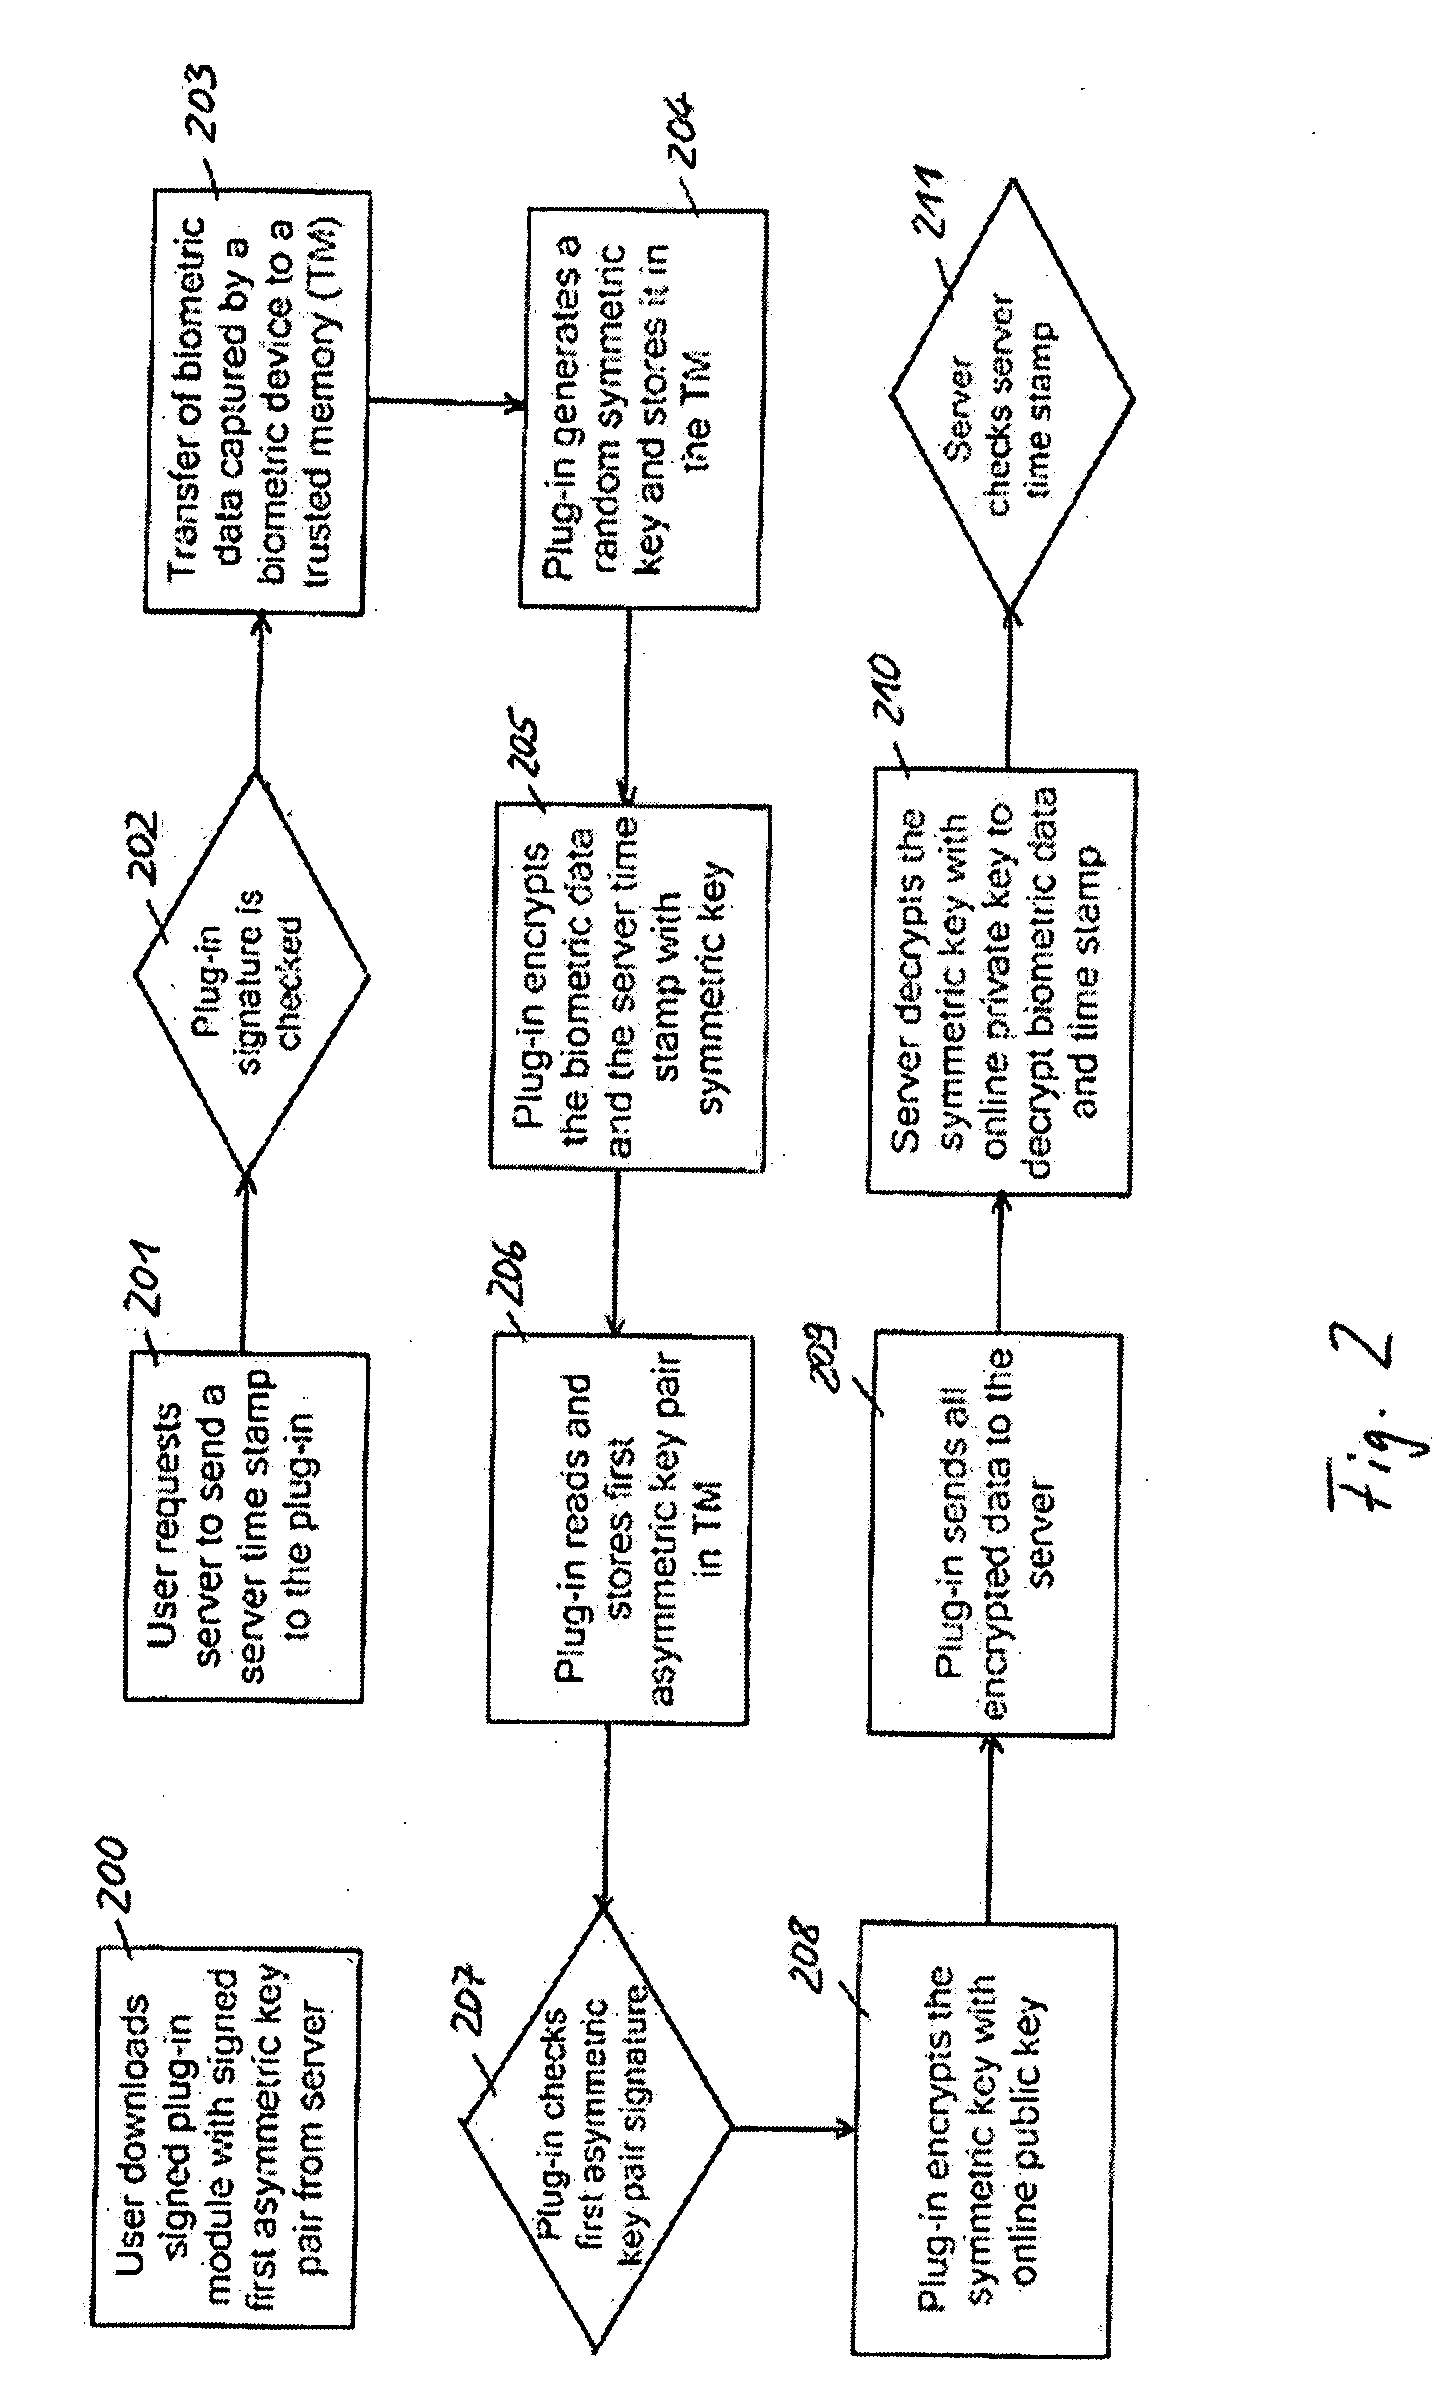 System and Method for Electronic Certification and Authentification